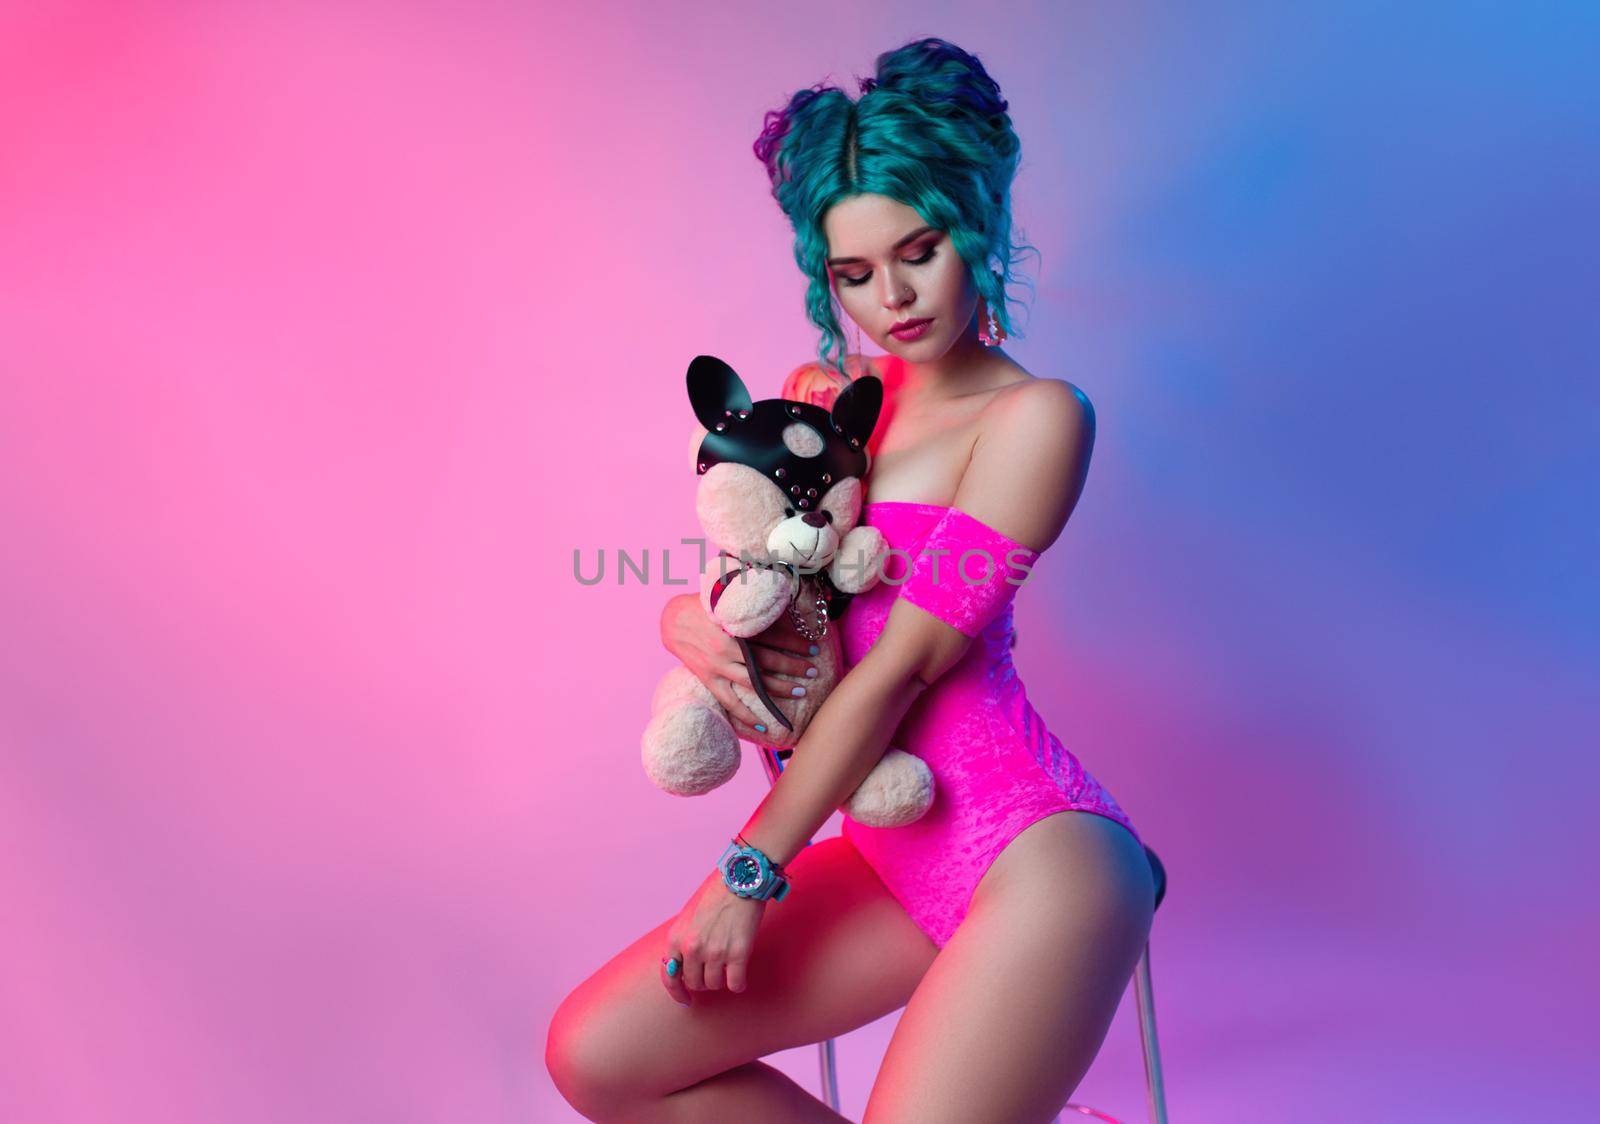 the woman with blue hair and a pink bodysuit is sitting on a bar stool